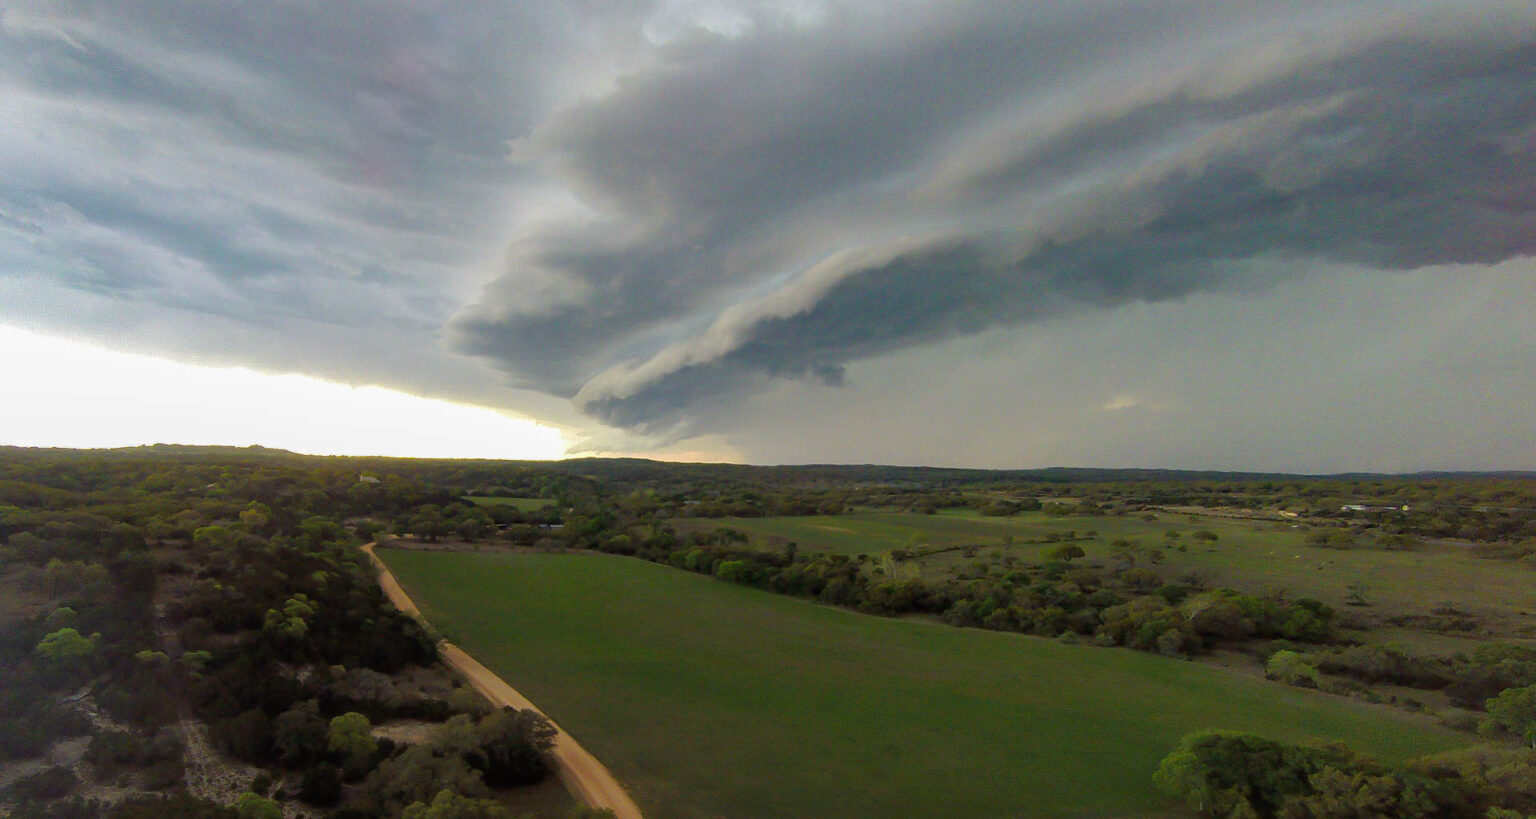 approaching storm front in texas hill country